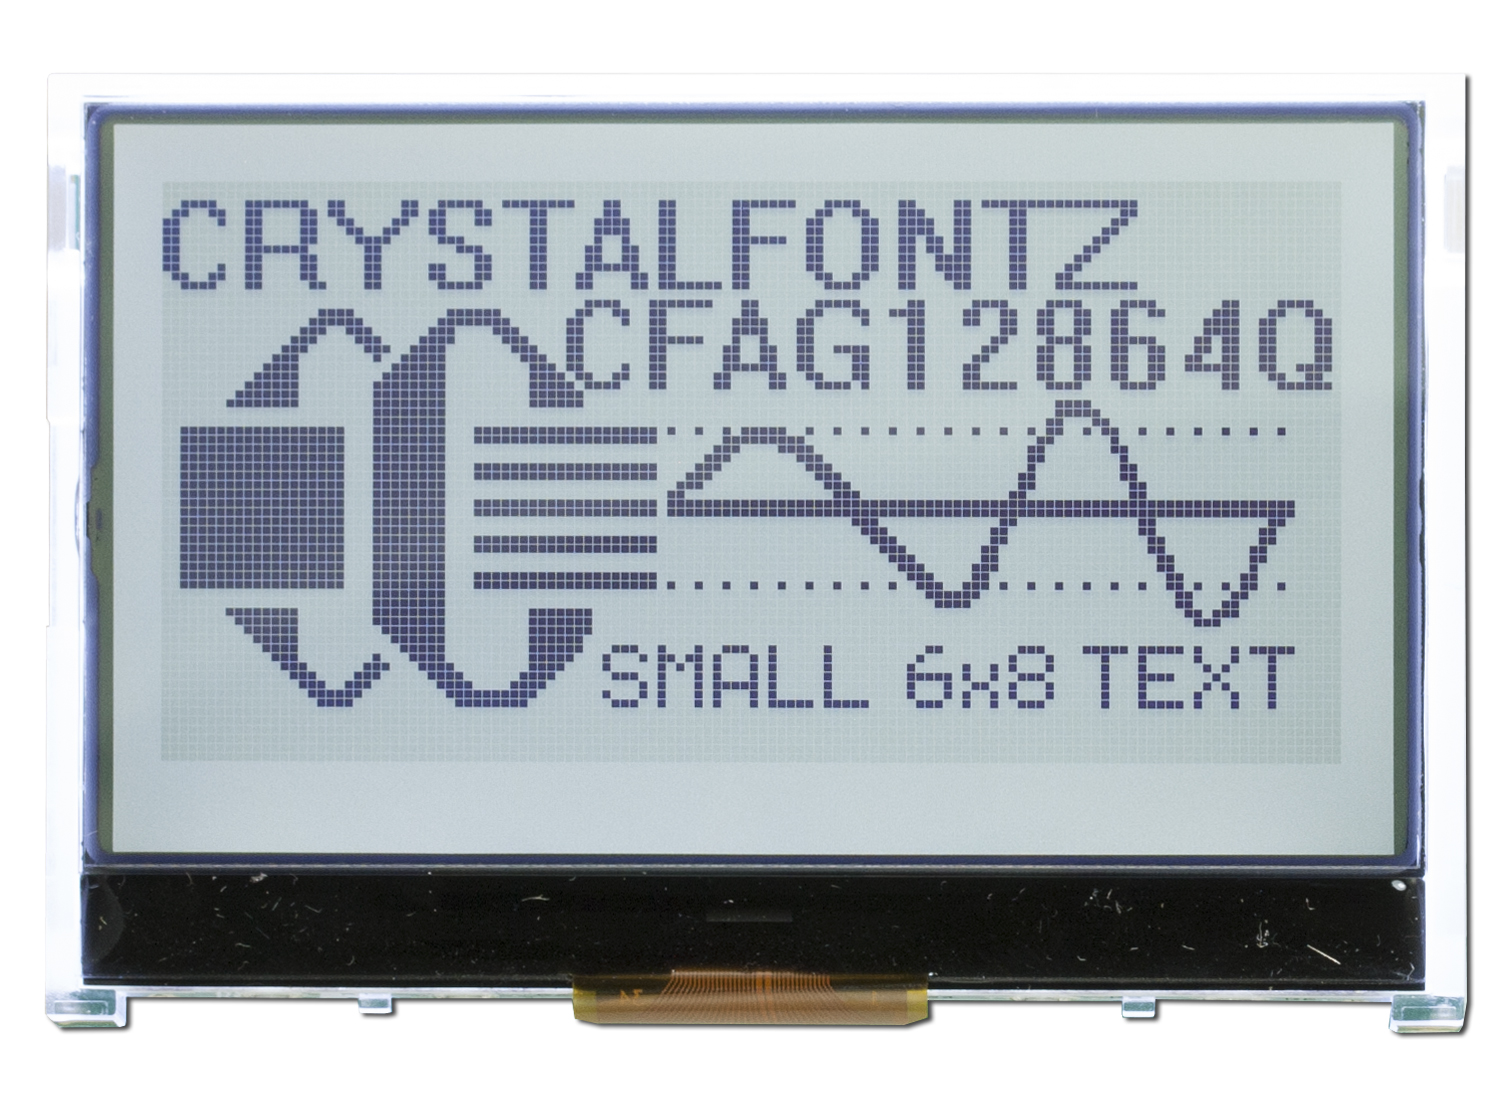 Sunlight Readable Graphic LCD Arduino Module from Crystalfontz